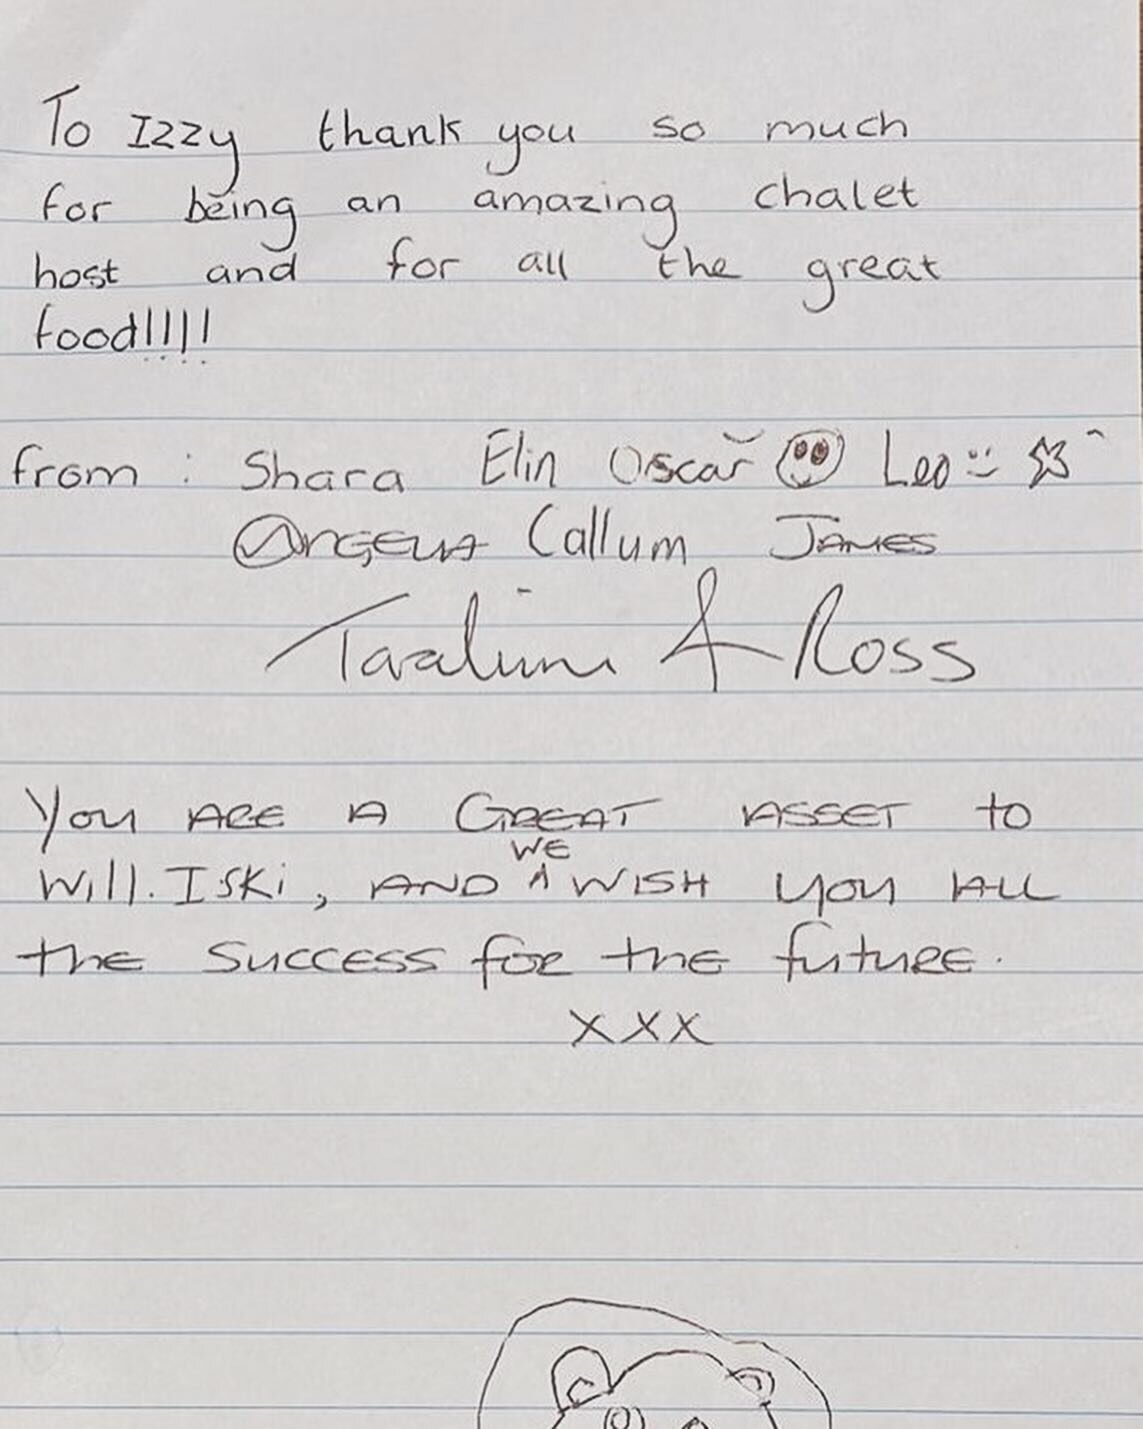 Well this is a full circle moment 💫
Our lovey host Izzy received this note from her fab guests in Chalet Cache last week&hellip;.which reminded us of the note 11 year old Izzy left for us back in 2017 when she was a will-I-ski? guest staying with he